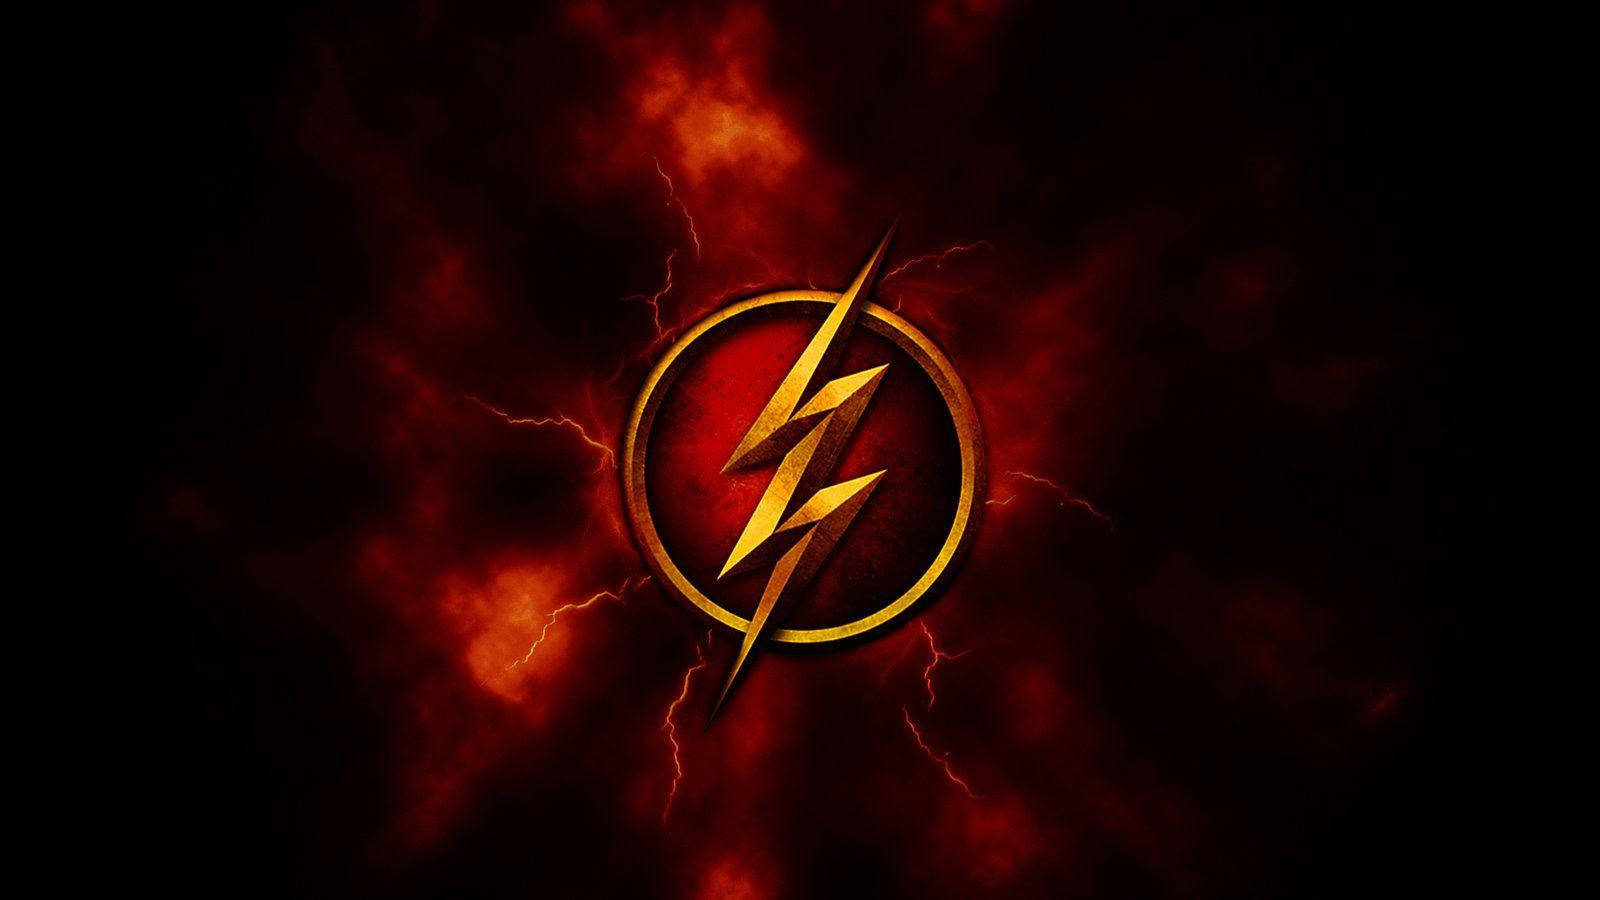 The Flash Cool Logos Background